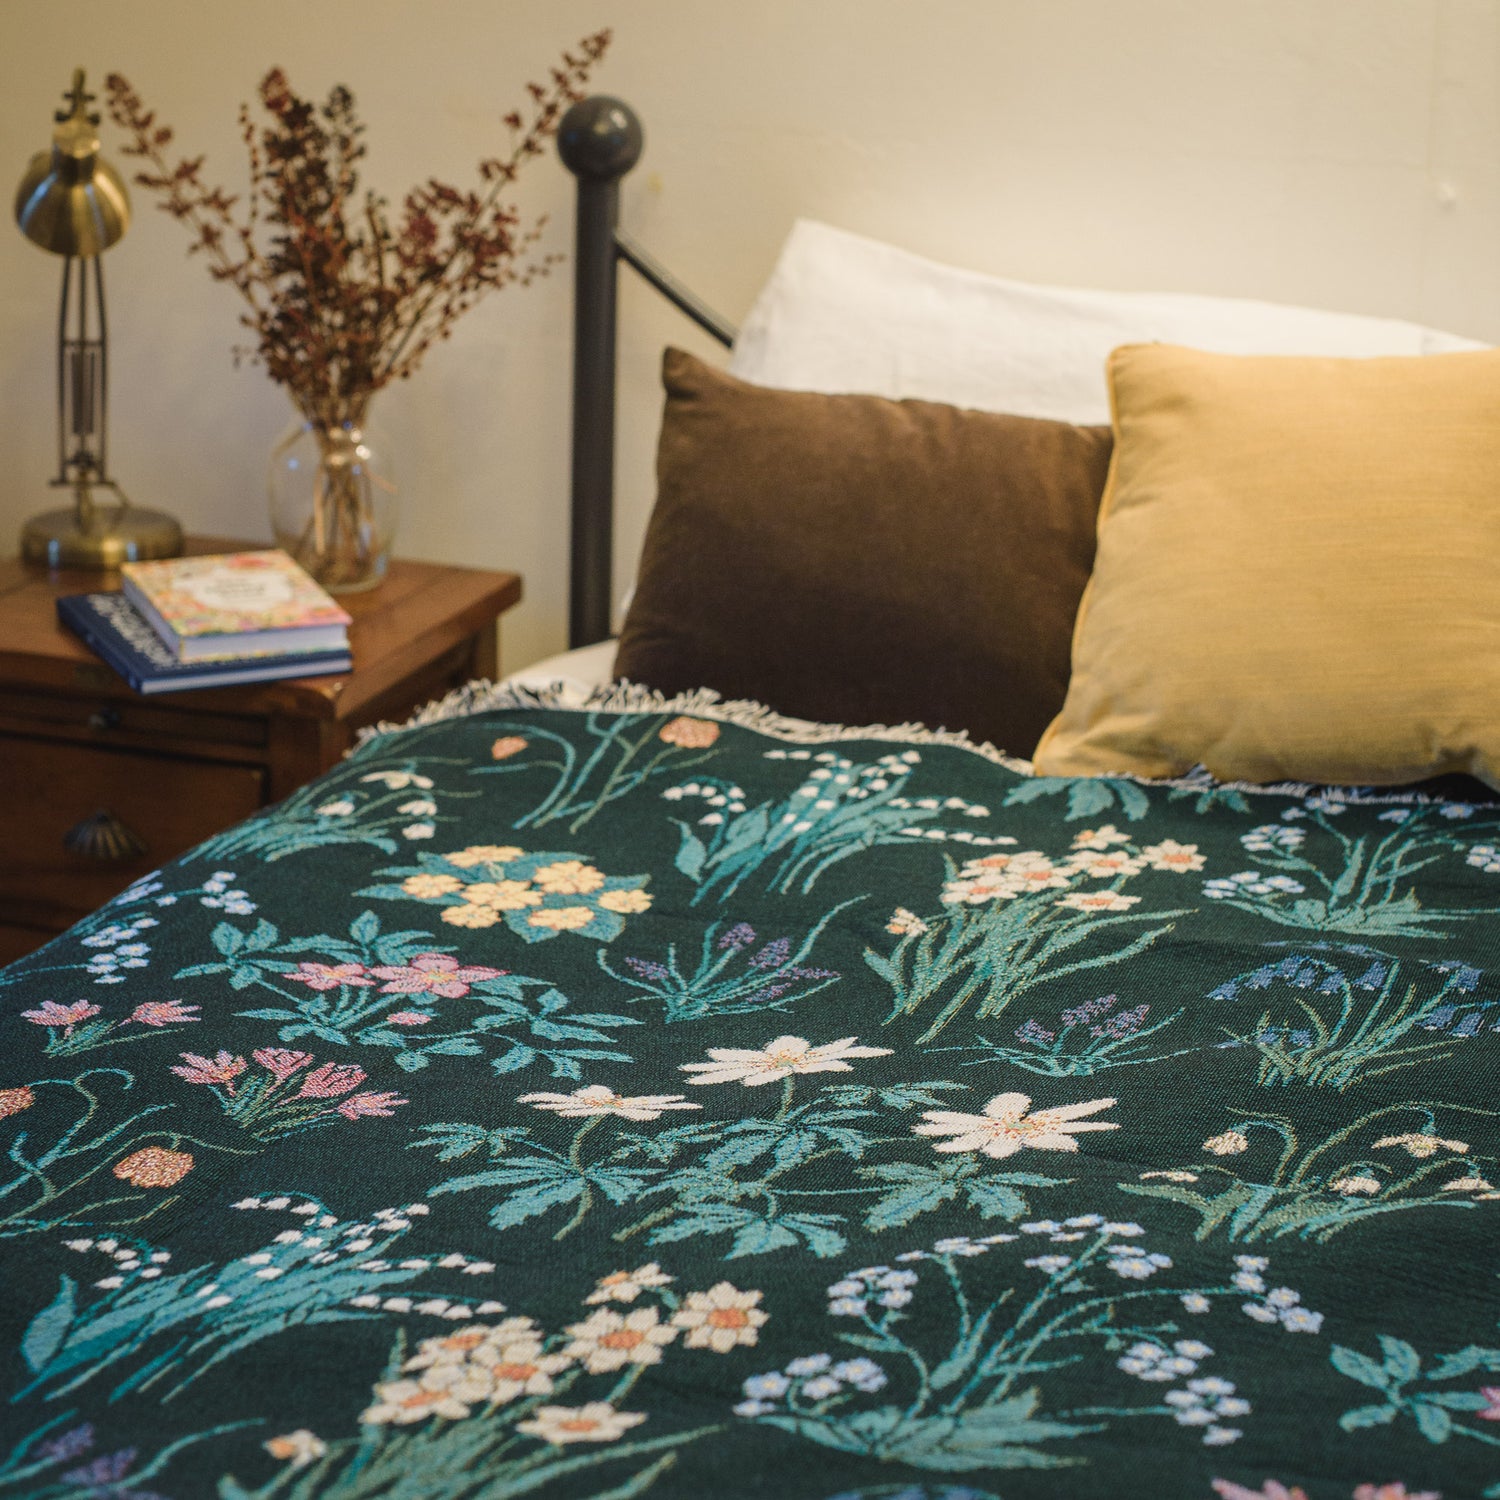 Spring flowers woven blanket in dark green with light coloured daffodils, forget me nots and bluebells spread over bed